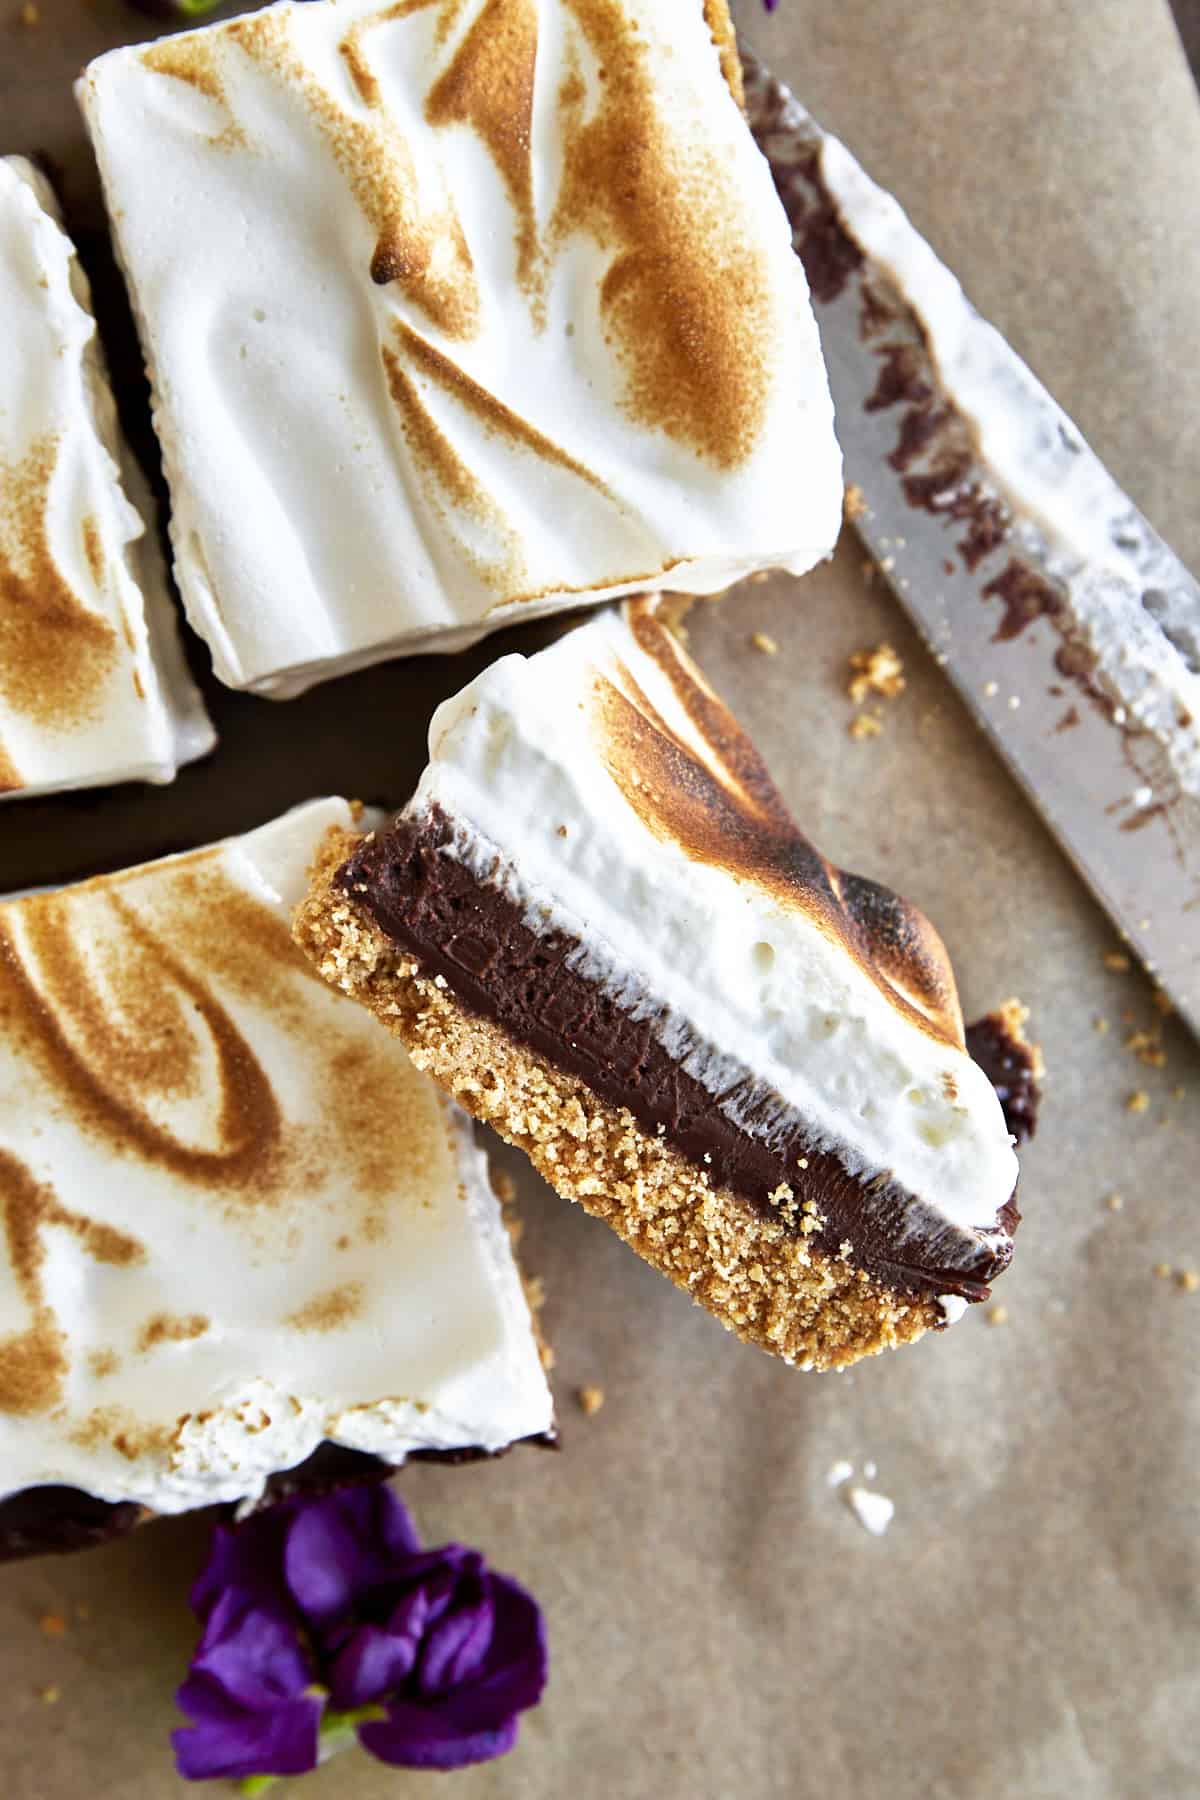 Side view of a s'mores bar with layers of graham cracker crust, chocolate ganache, and meringue. 